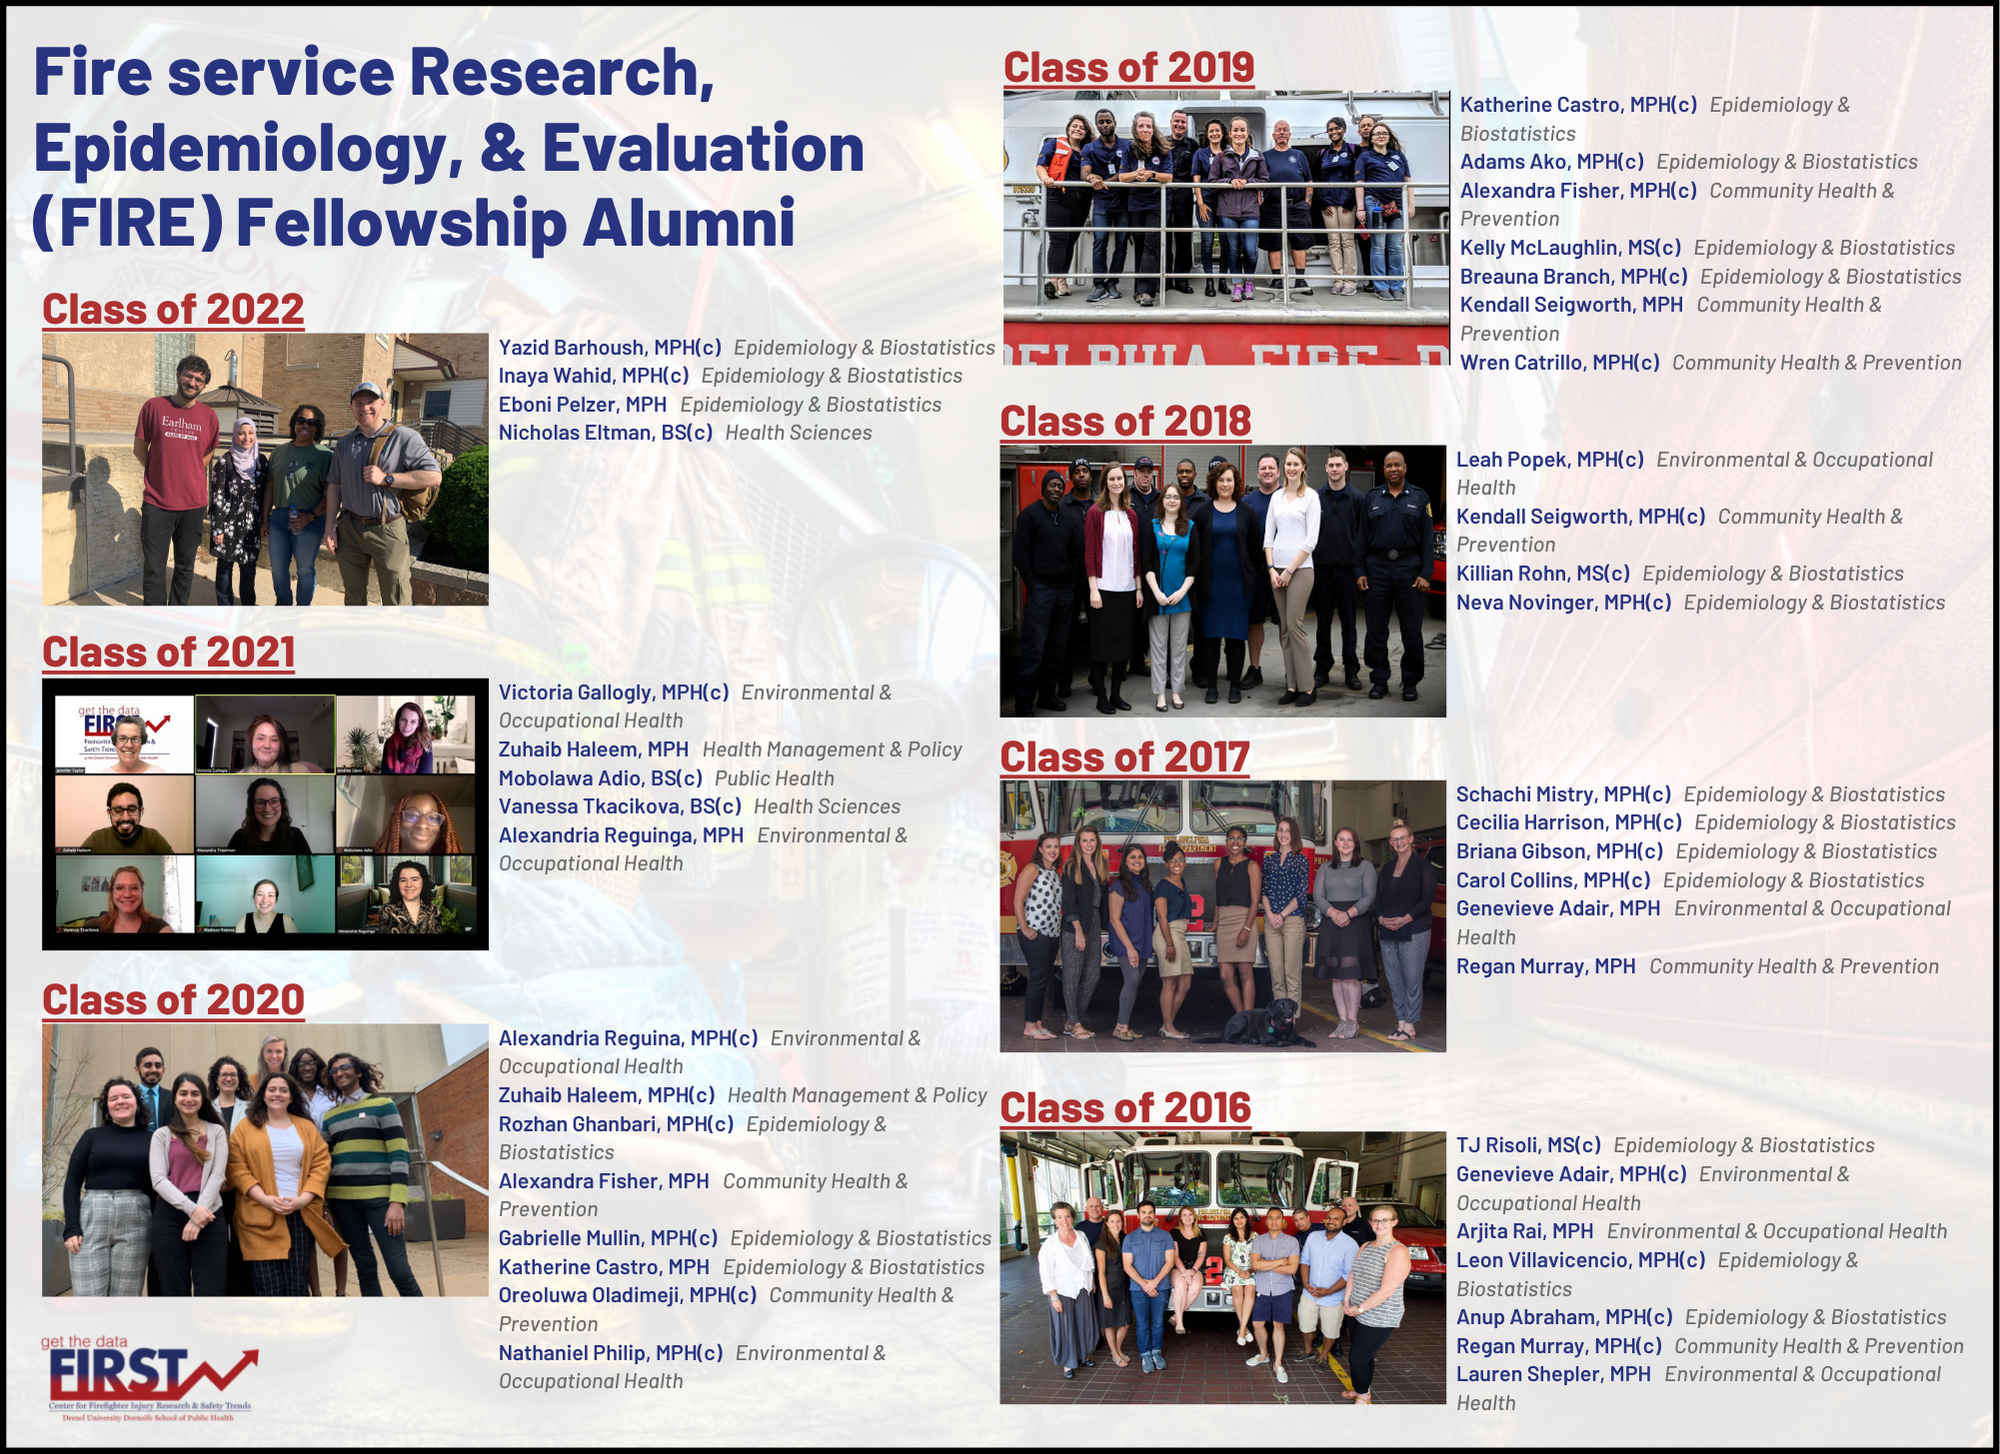 FIRE Fellowship Alumni, from 2016 to 2022